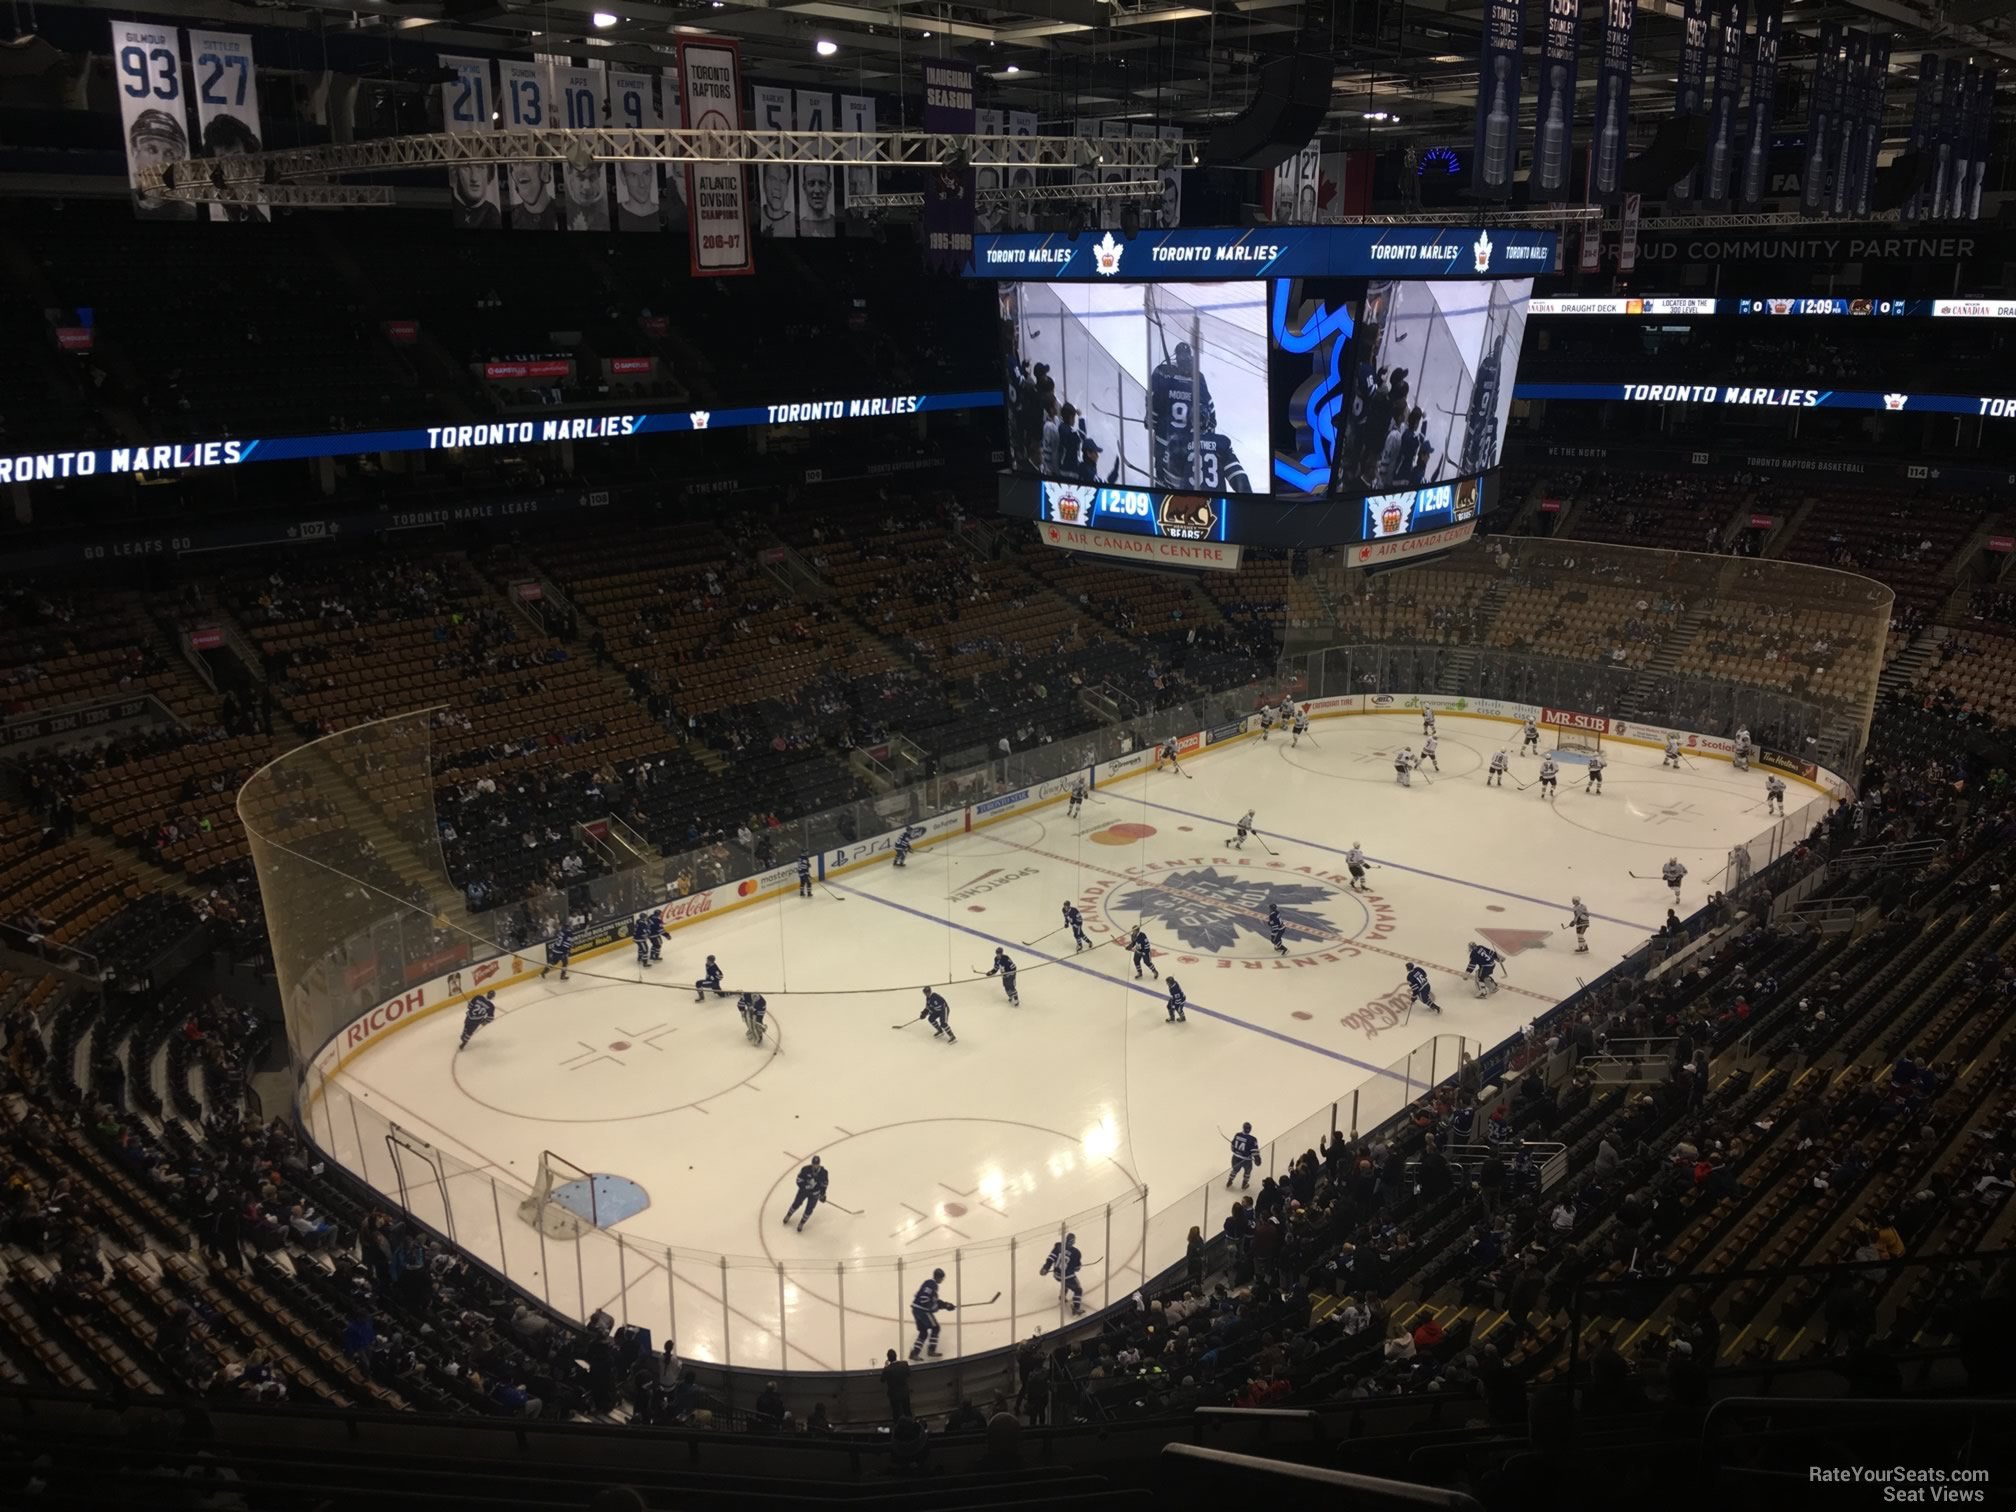 section 301, row 10 seat view  for hockey - scotiabank arena